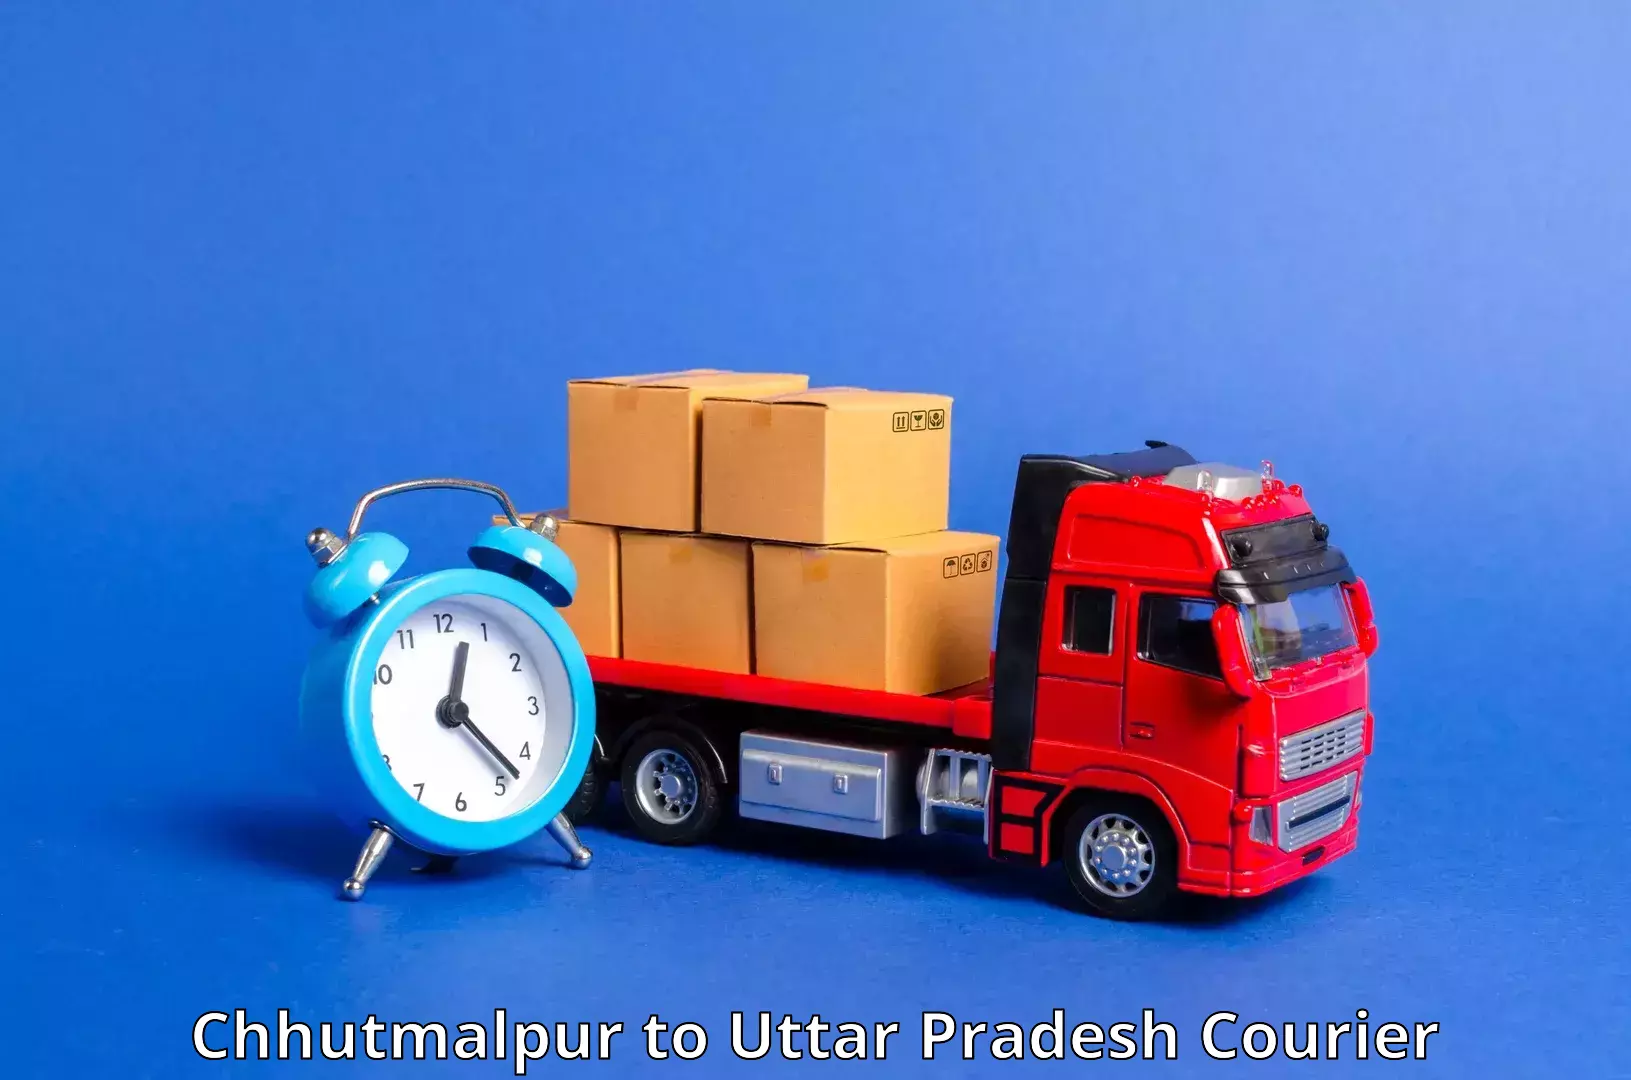 Reliable shipping partners Chhutmalpur to Bareilly